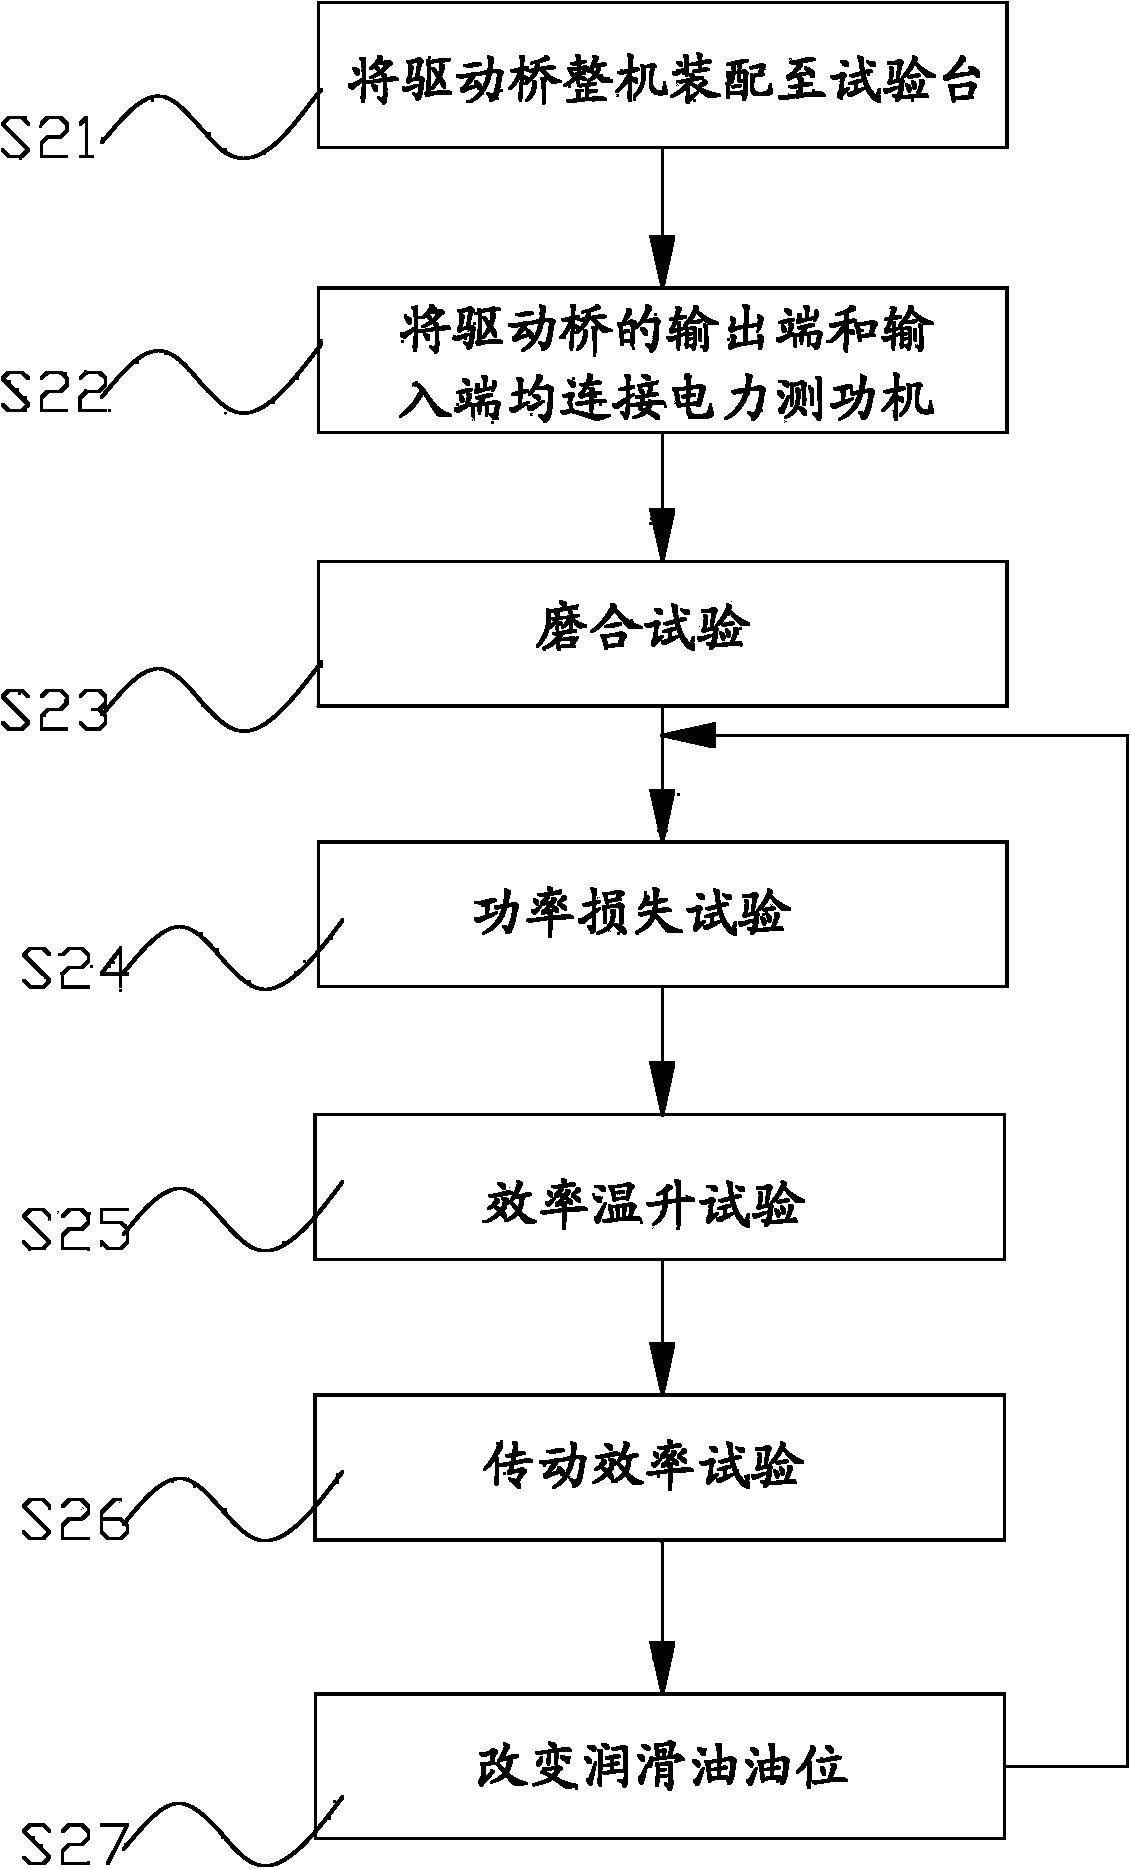 Drive axle testing method and system